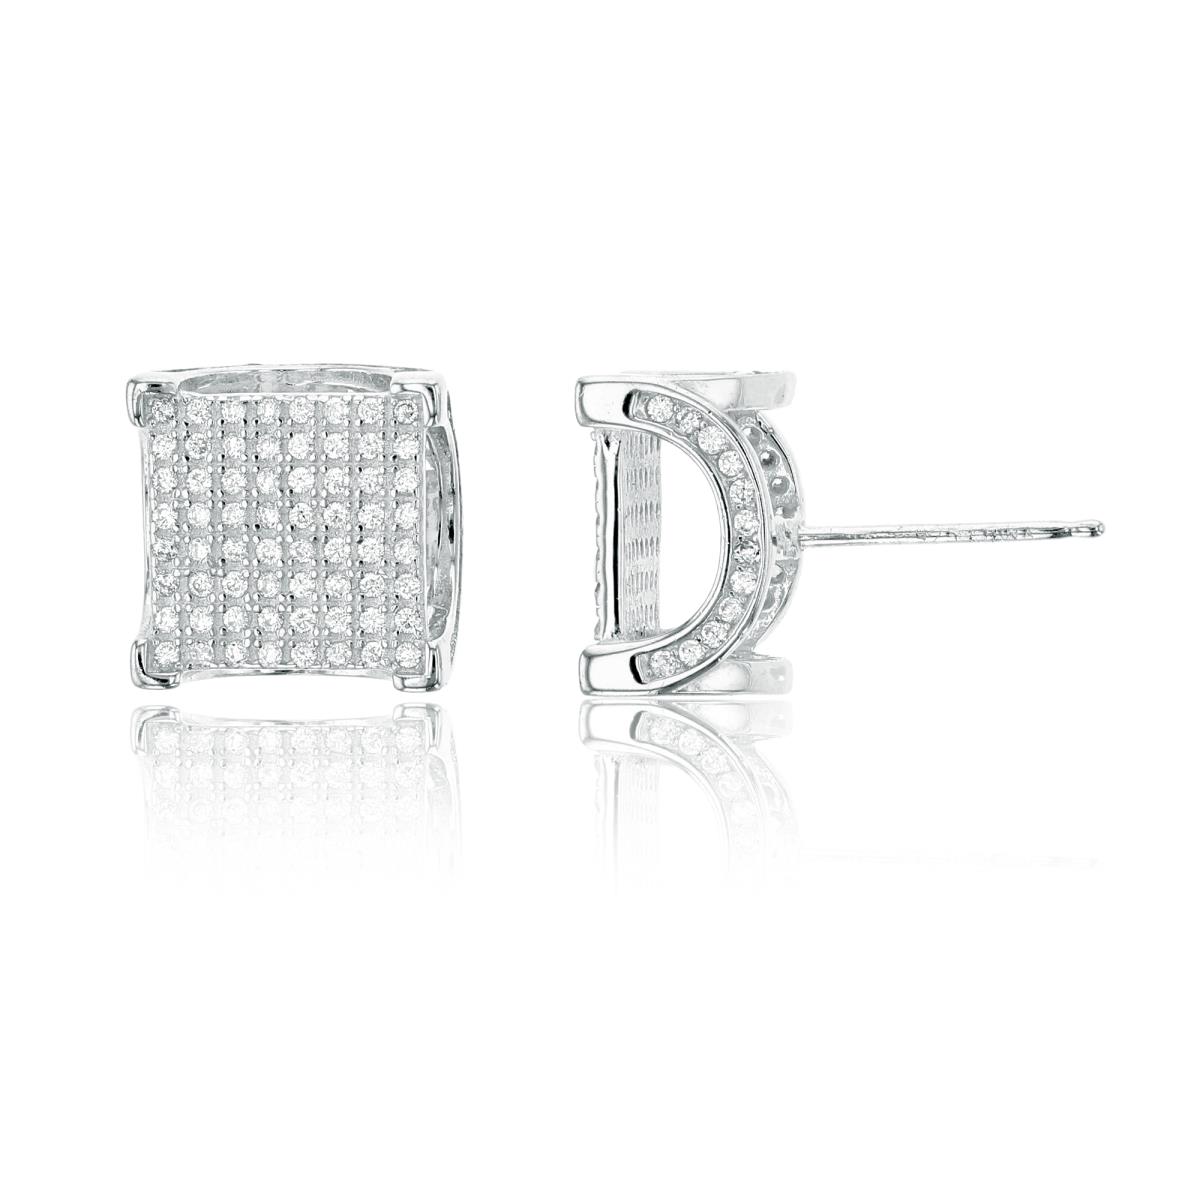 Sterling Silver Rhodium 8x8mm Square 3D Micropave Stud Earring